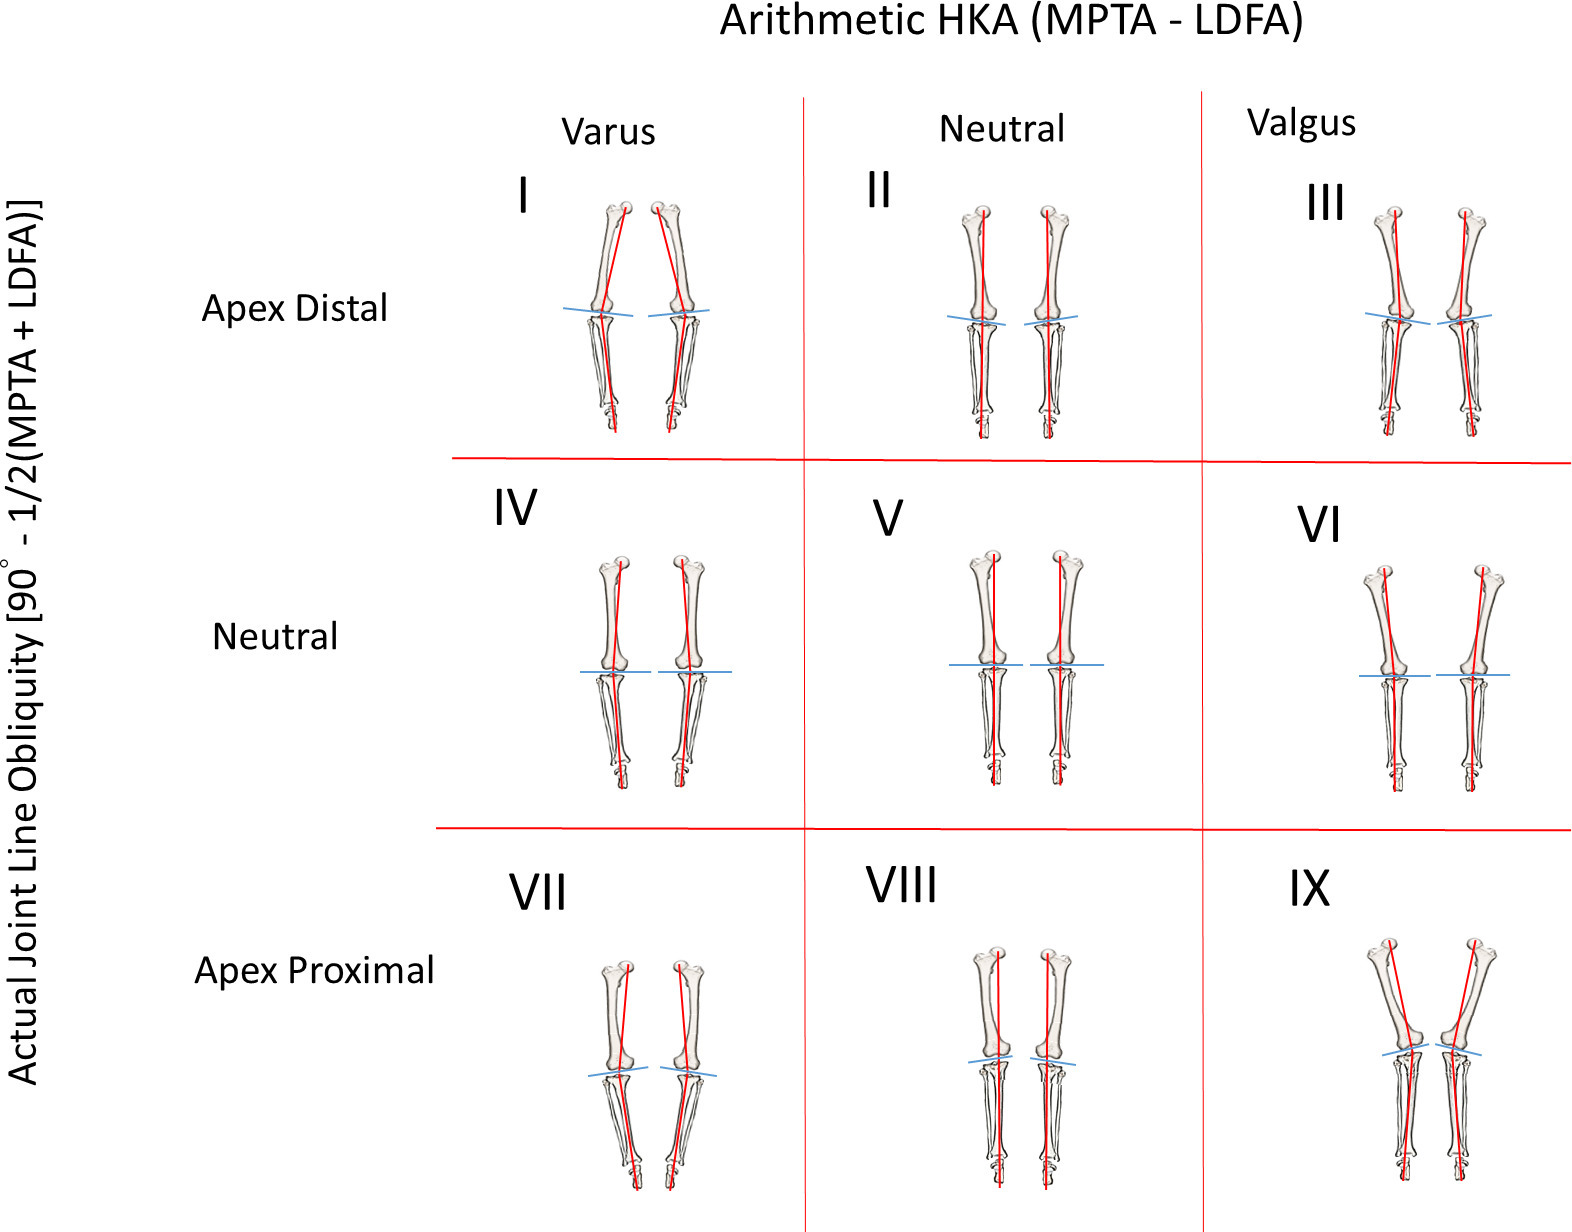 Fig. 2 
            The modified coronal plane alignment of the knee classification with nine theoretical types of knee. HKA, hip-knee-ankle angle; LDFA, lateral distal femoral angle; MPTA, medial proximal tibial angle.
          